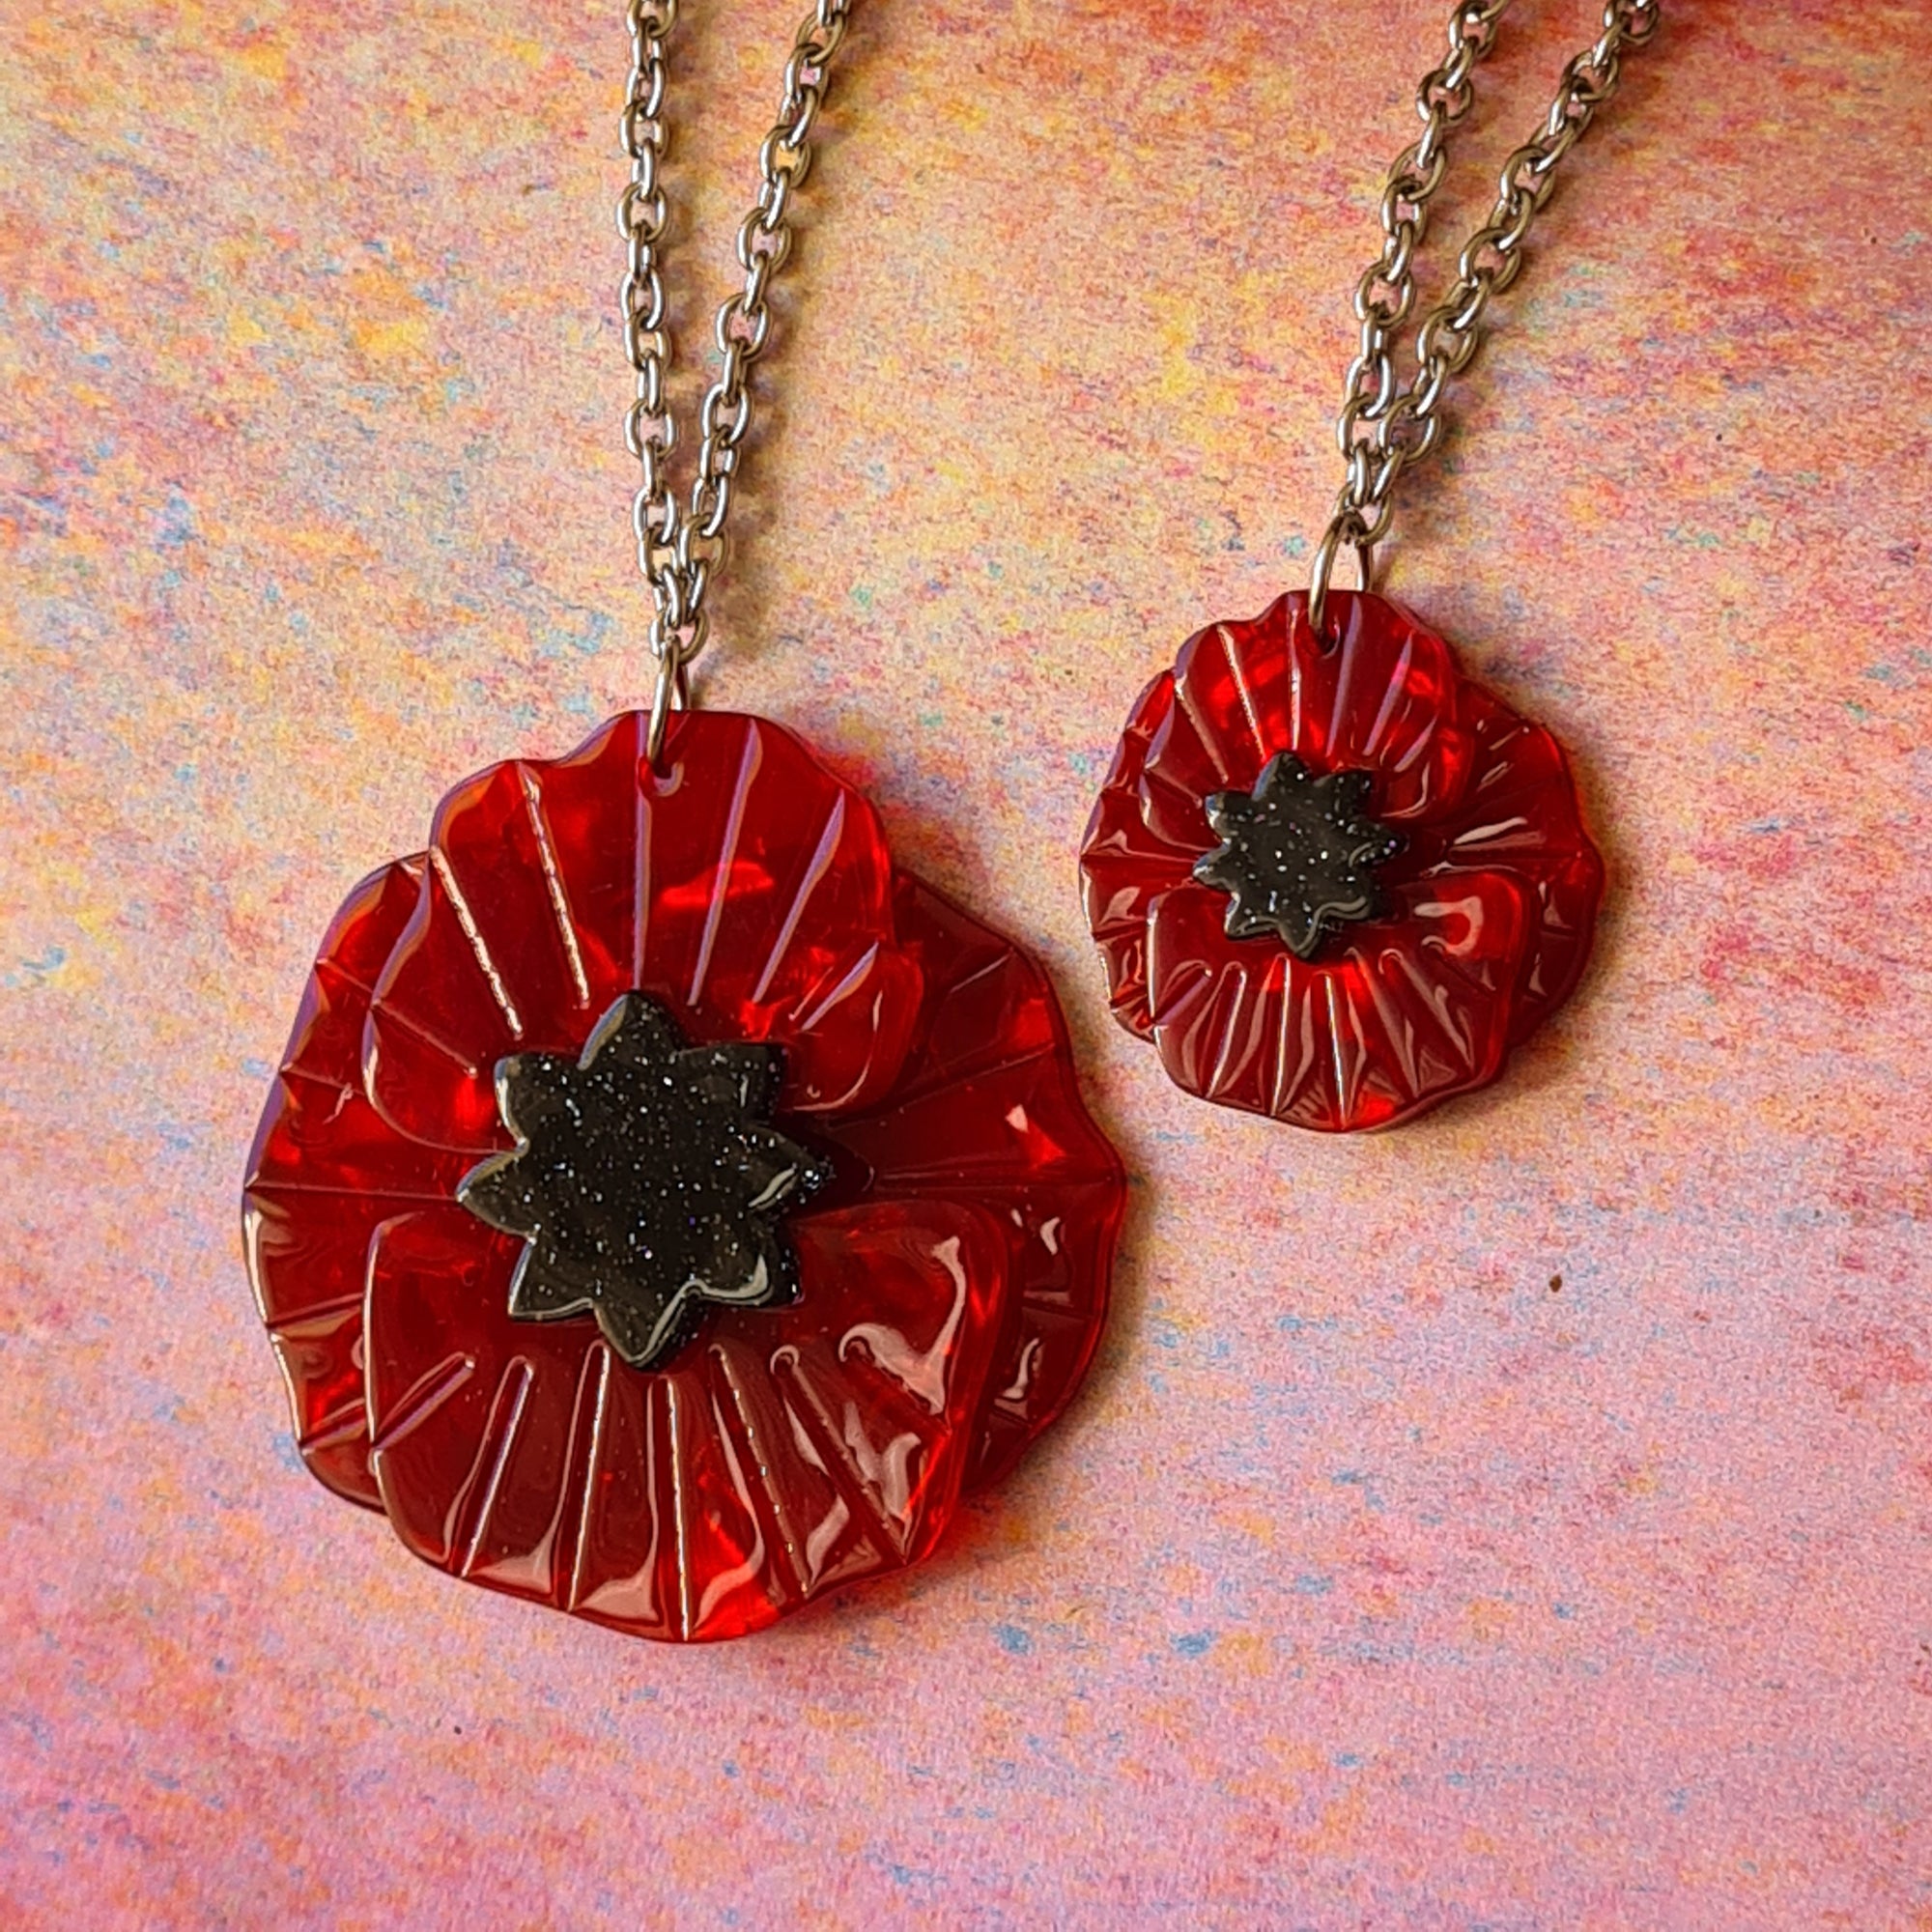 Poppy Field Pendant Necklace (Choose from Large or Mini)  by Erstwilder